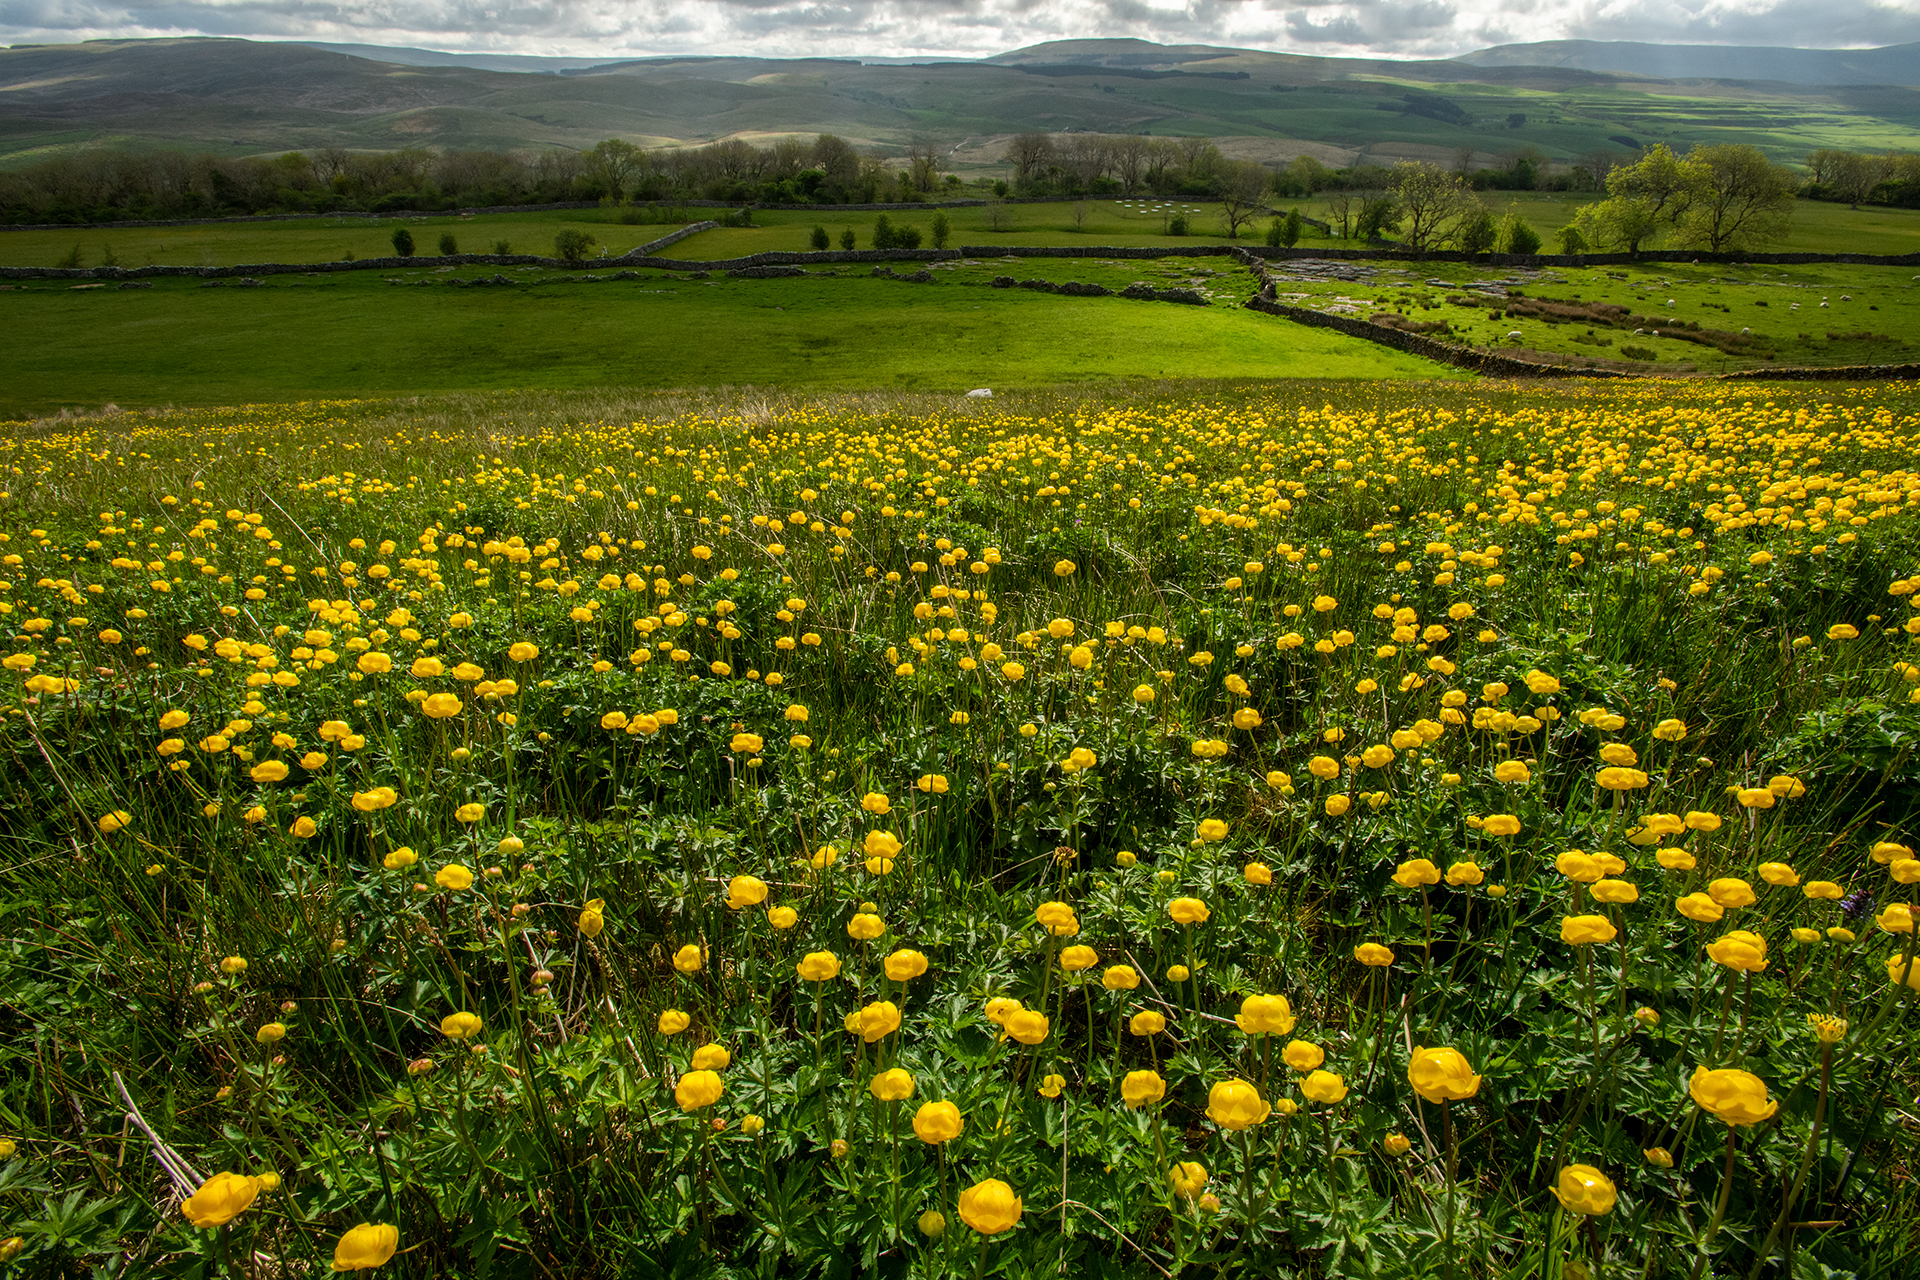 Yellow wildflowers in a field with dry stone walls and moorland in the background